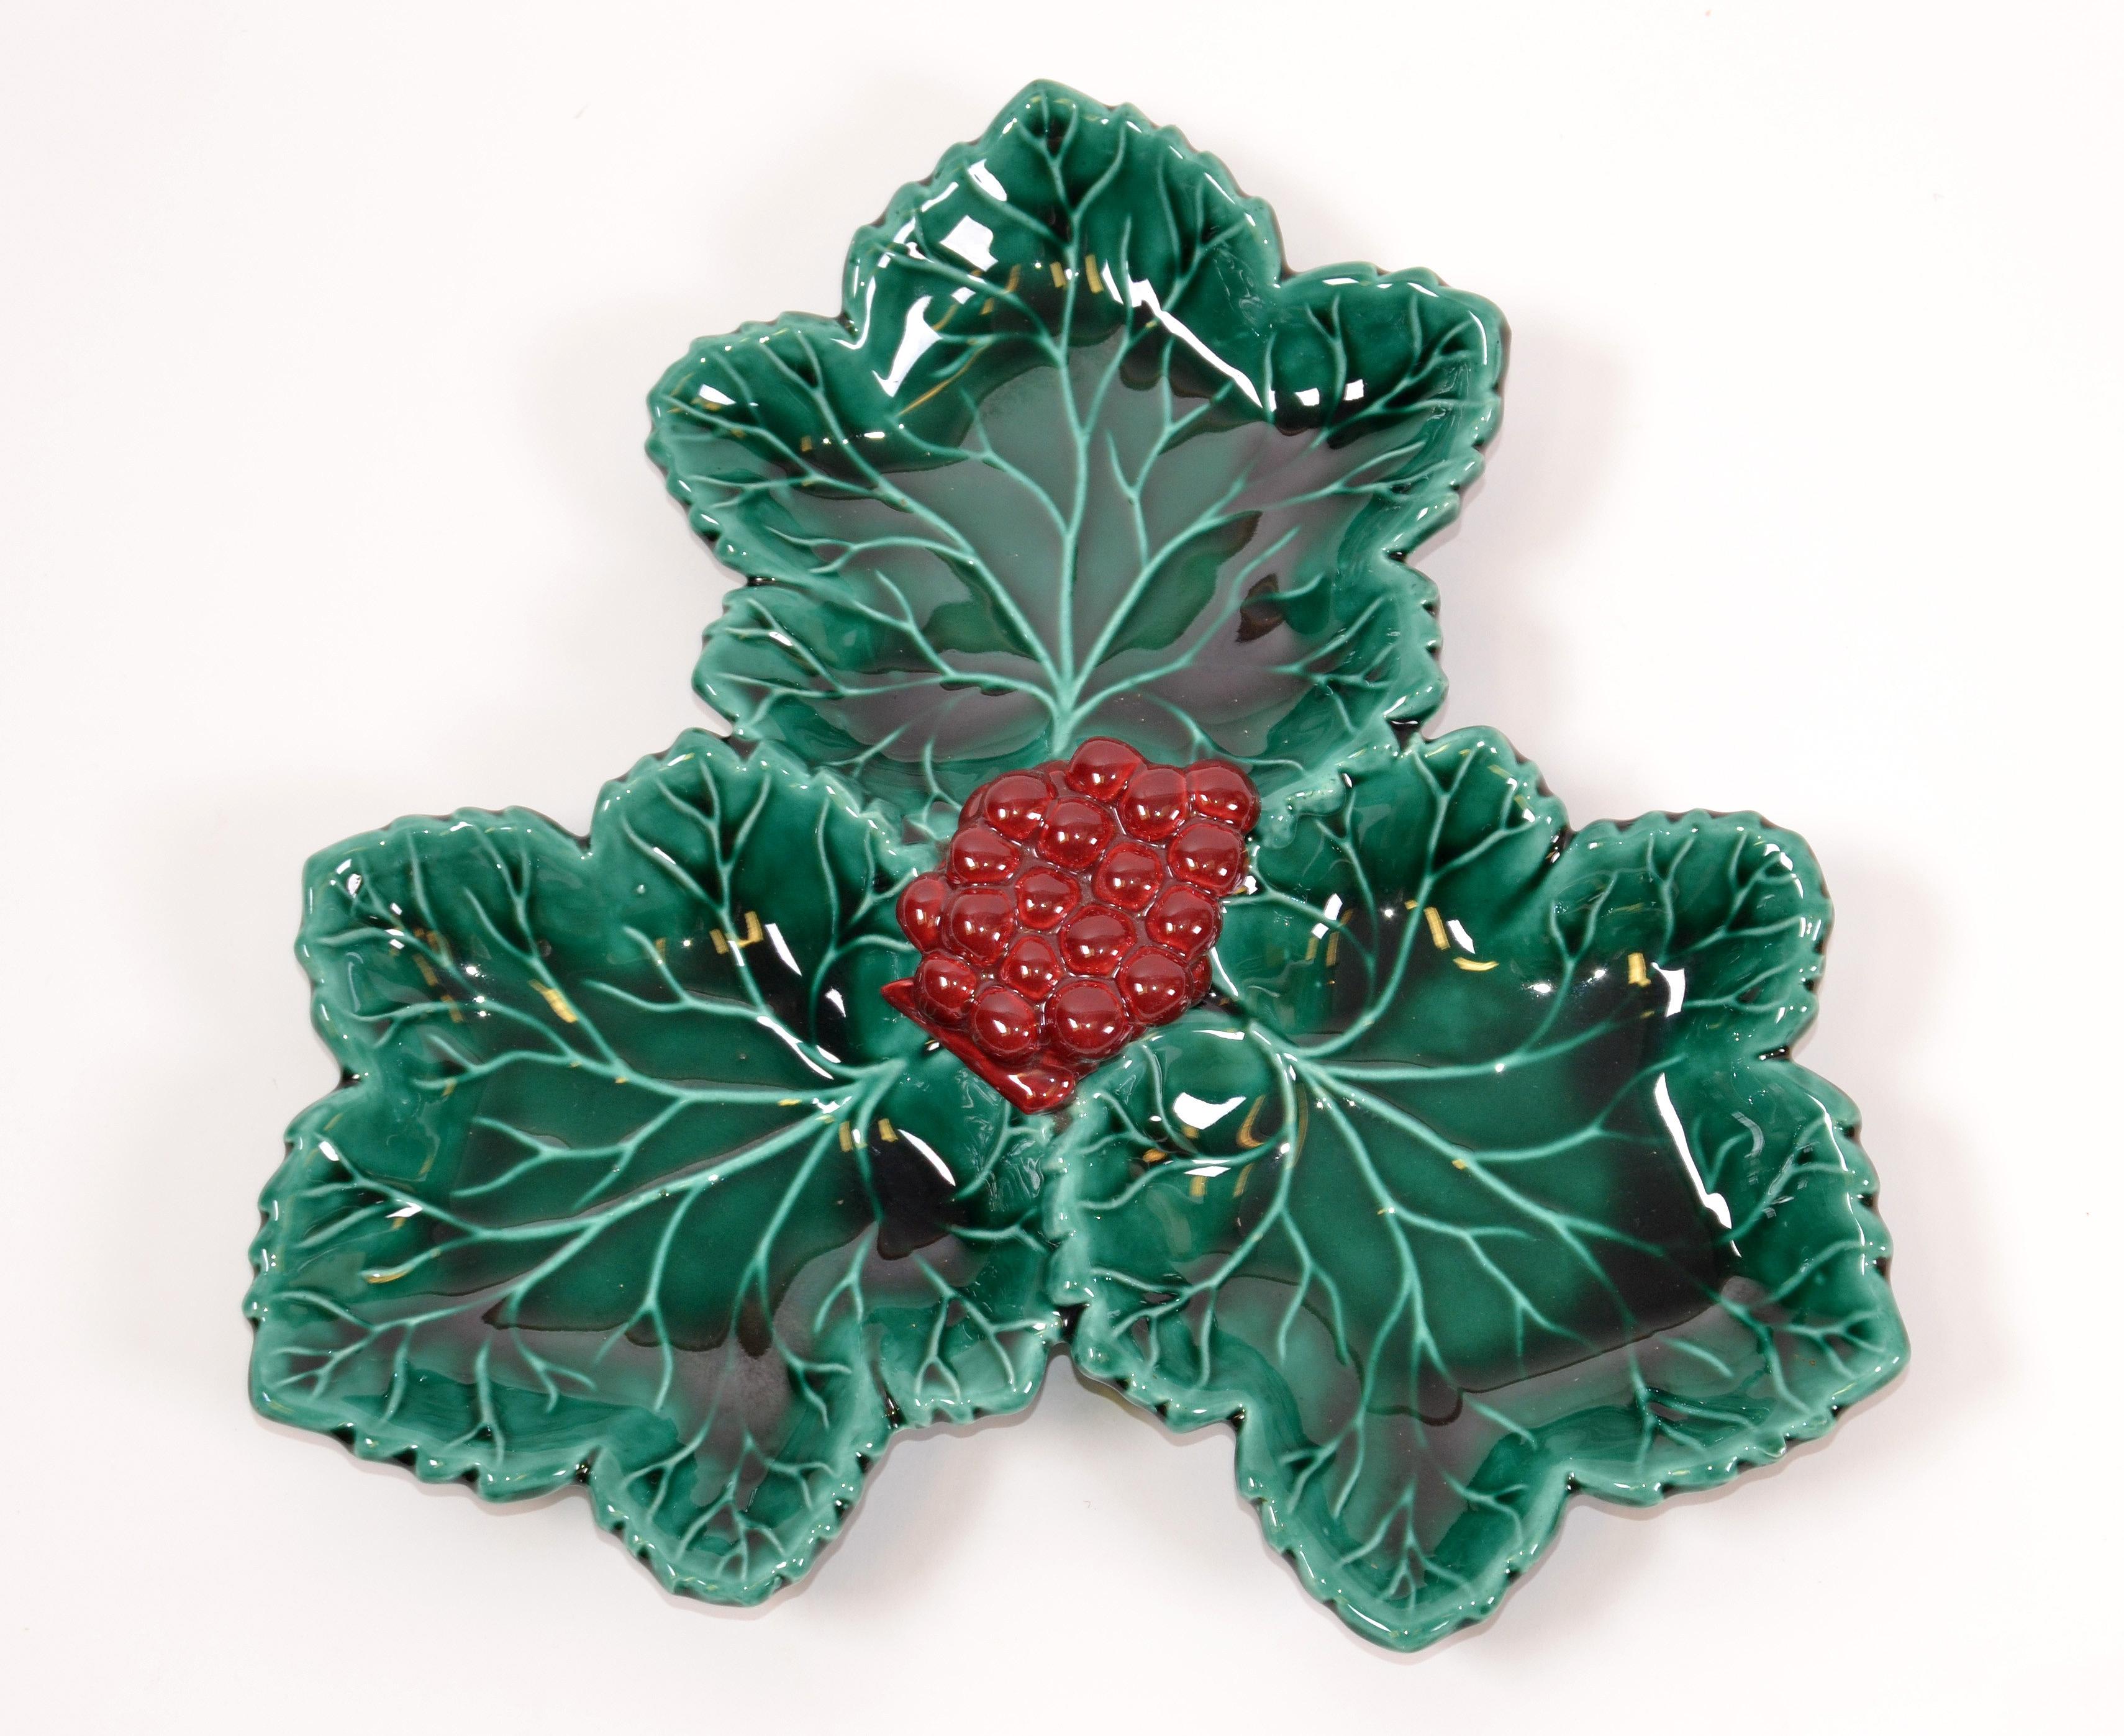 Vallauris French Glazed Grapes & Vine Leaves Ceramic Serving Plate Green and Red For Sale 5